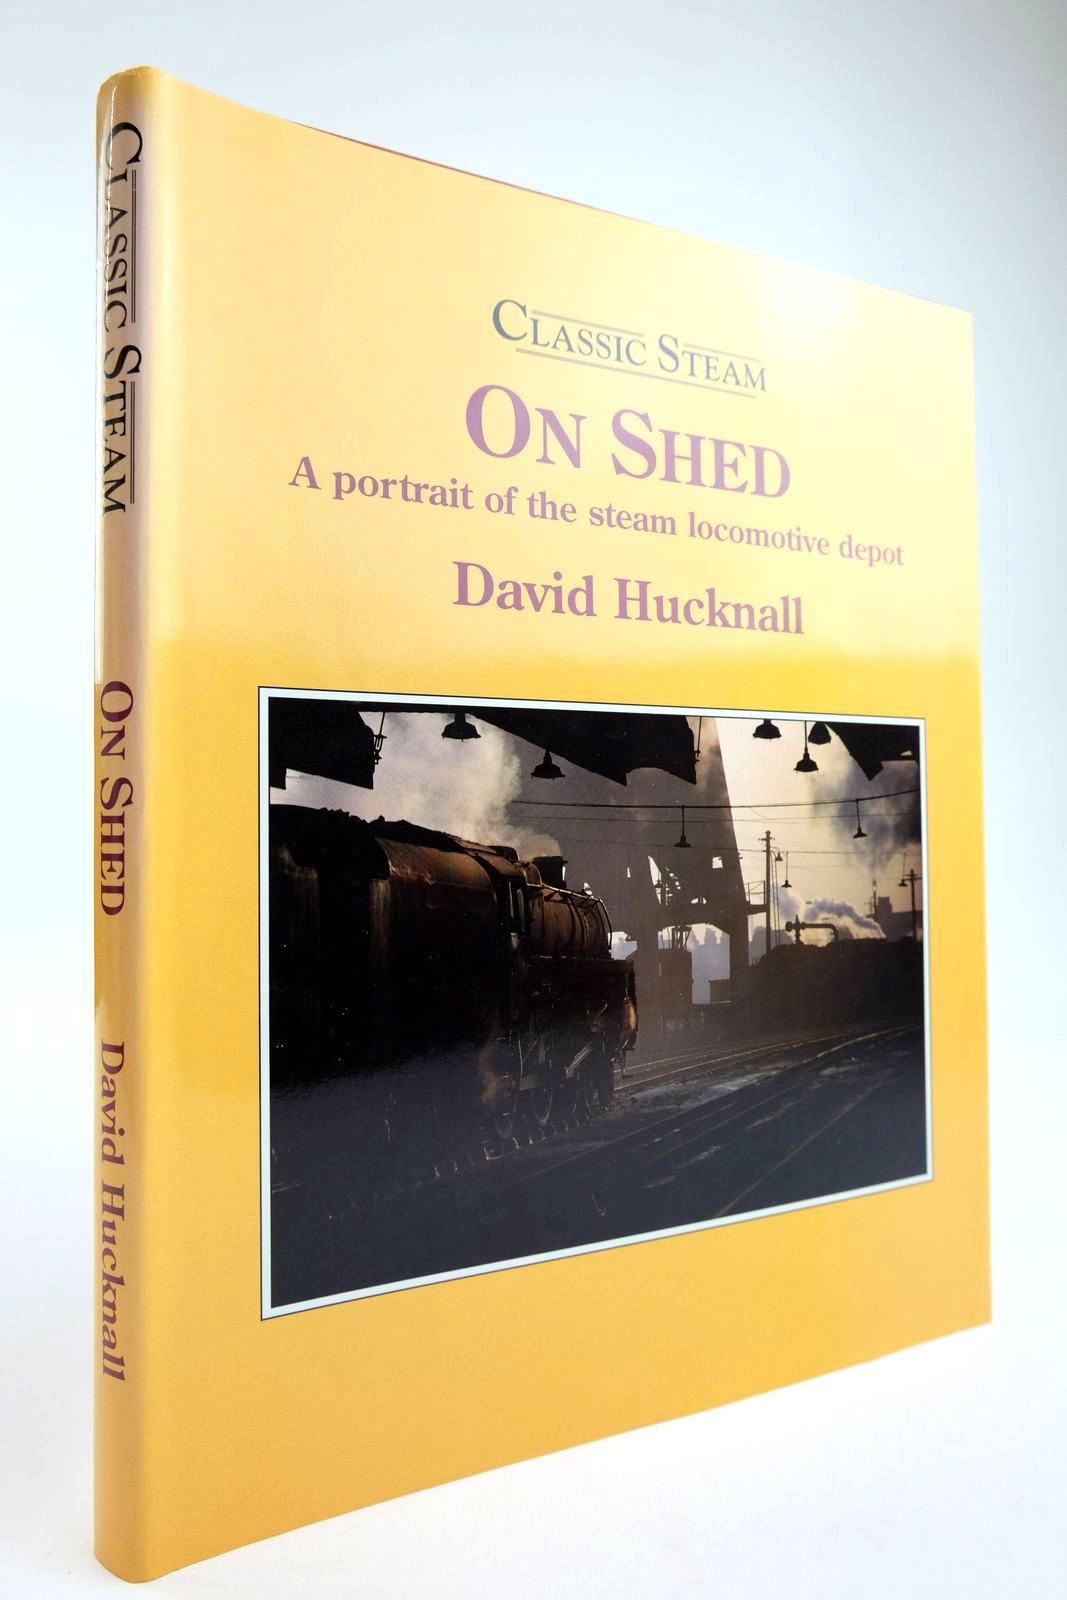 Photo of CLASSIC STEAM ON SHED written by Hucknall, David published by Book Club Associates (STOCK CODE: 2133844)  for sale by Stella & Rose's Books